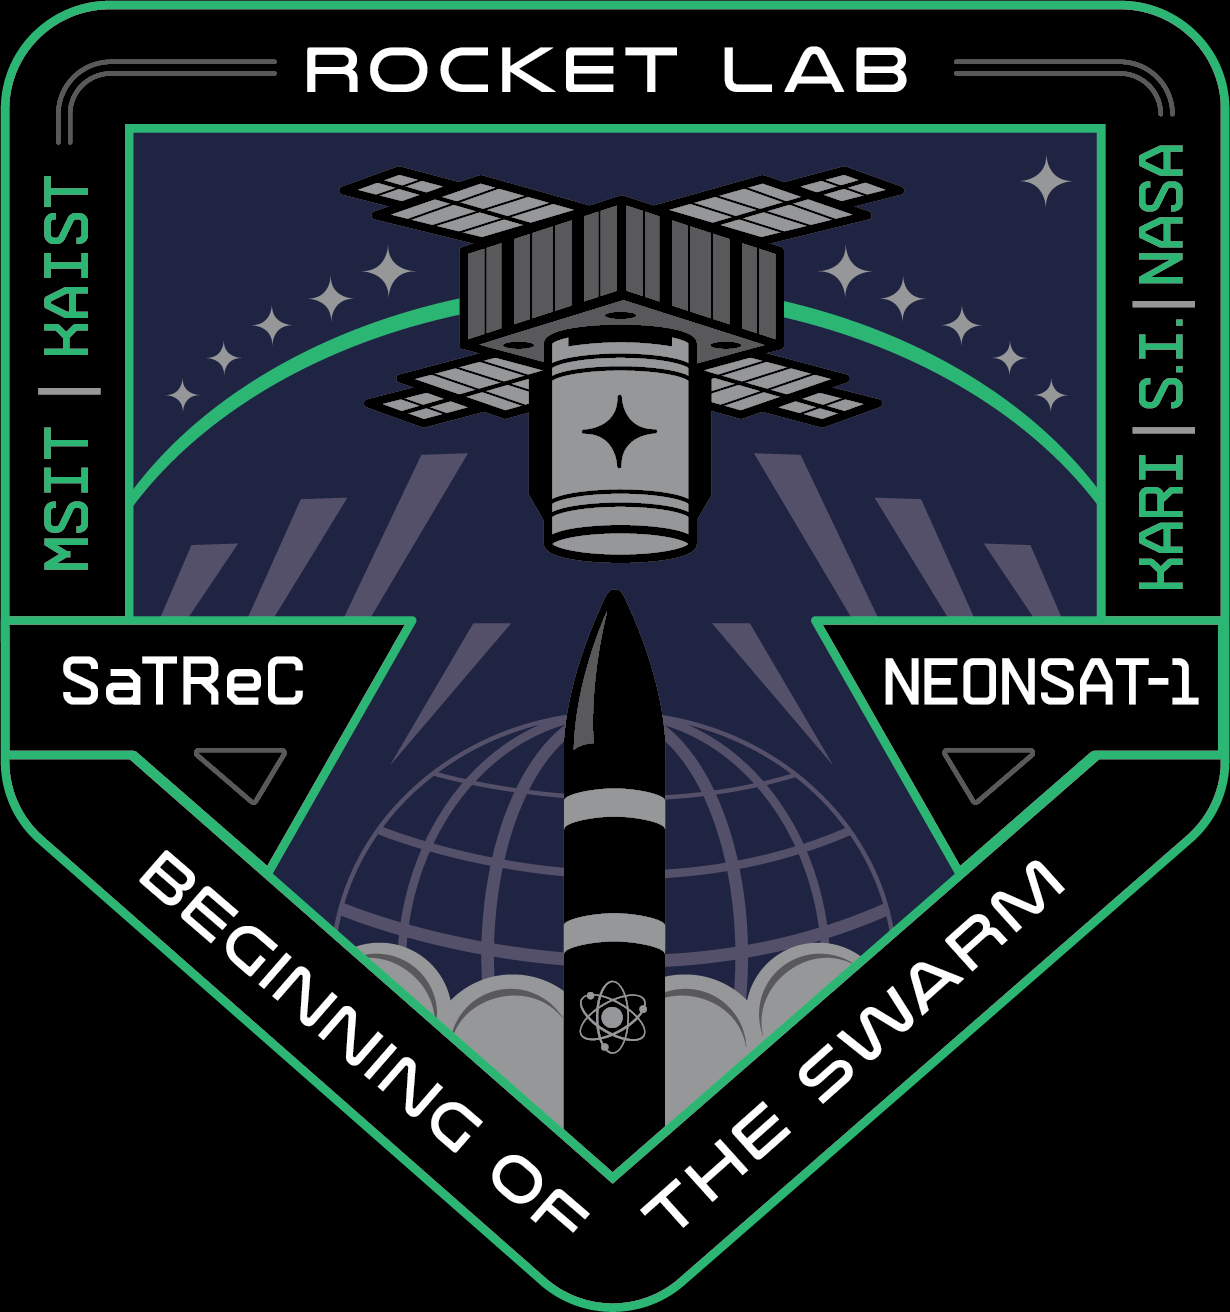 a black framed mission patch shaped like an upside-down house, with green trimmings and a black rocket rising from the central point at the bottom. A satellite floats above the rocket, suspended on a green arch spanning the patch.